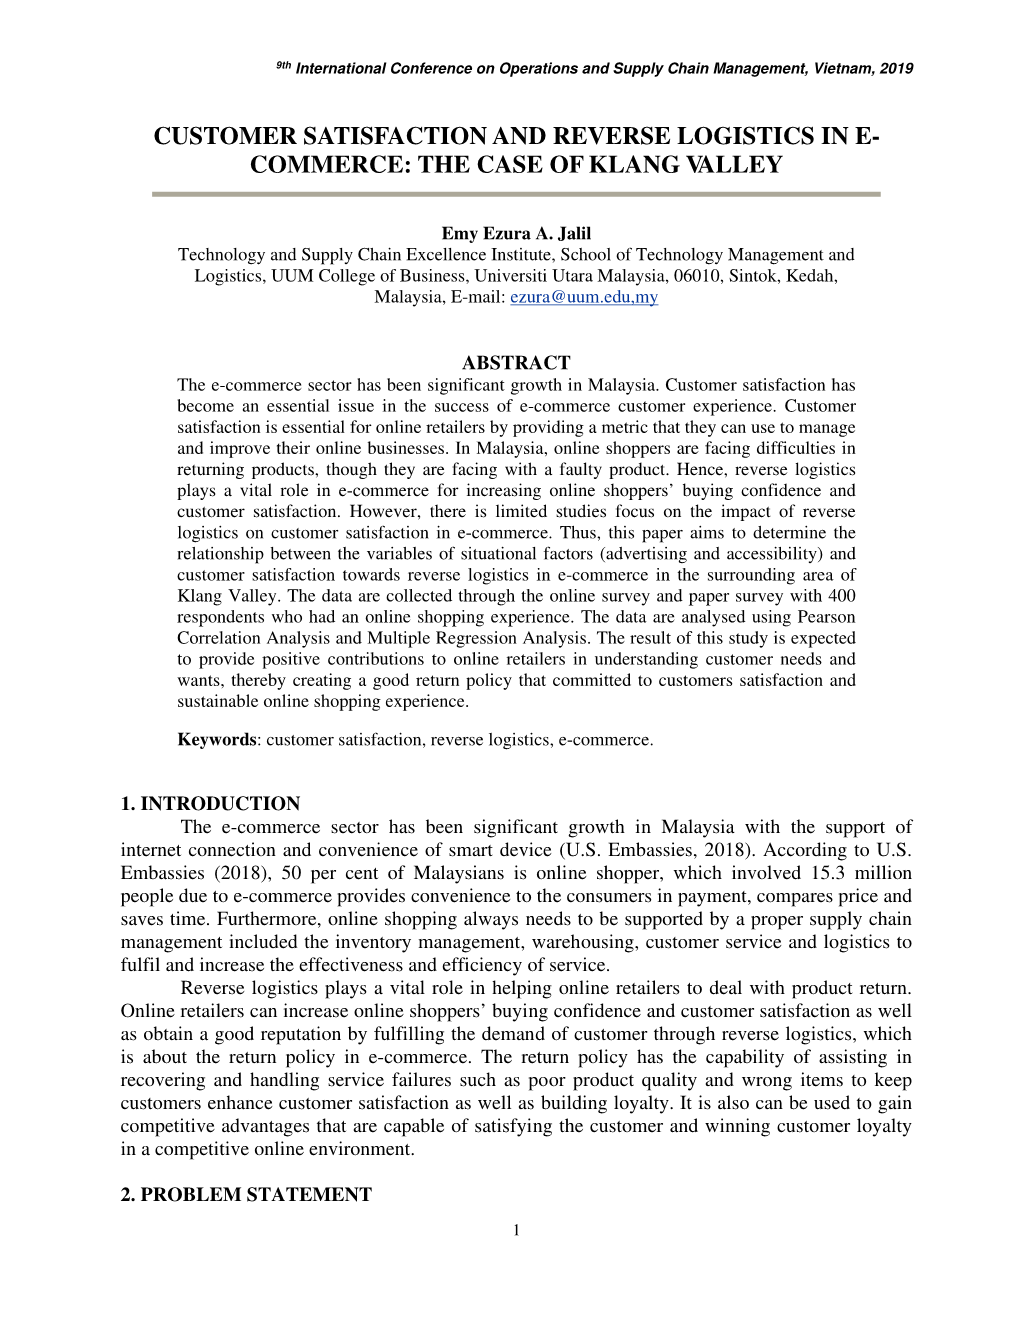 Customer Satisfaction and Reverse Logistics in E- Commerce: the Case of Klang Valley